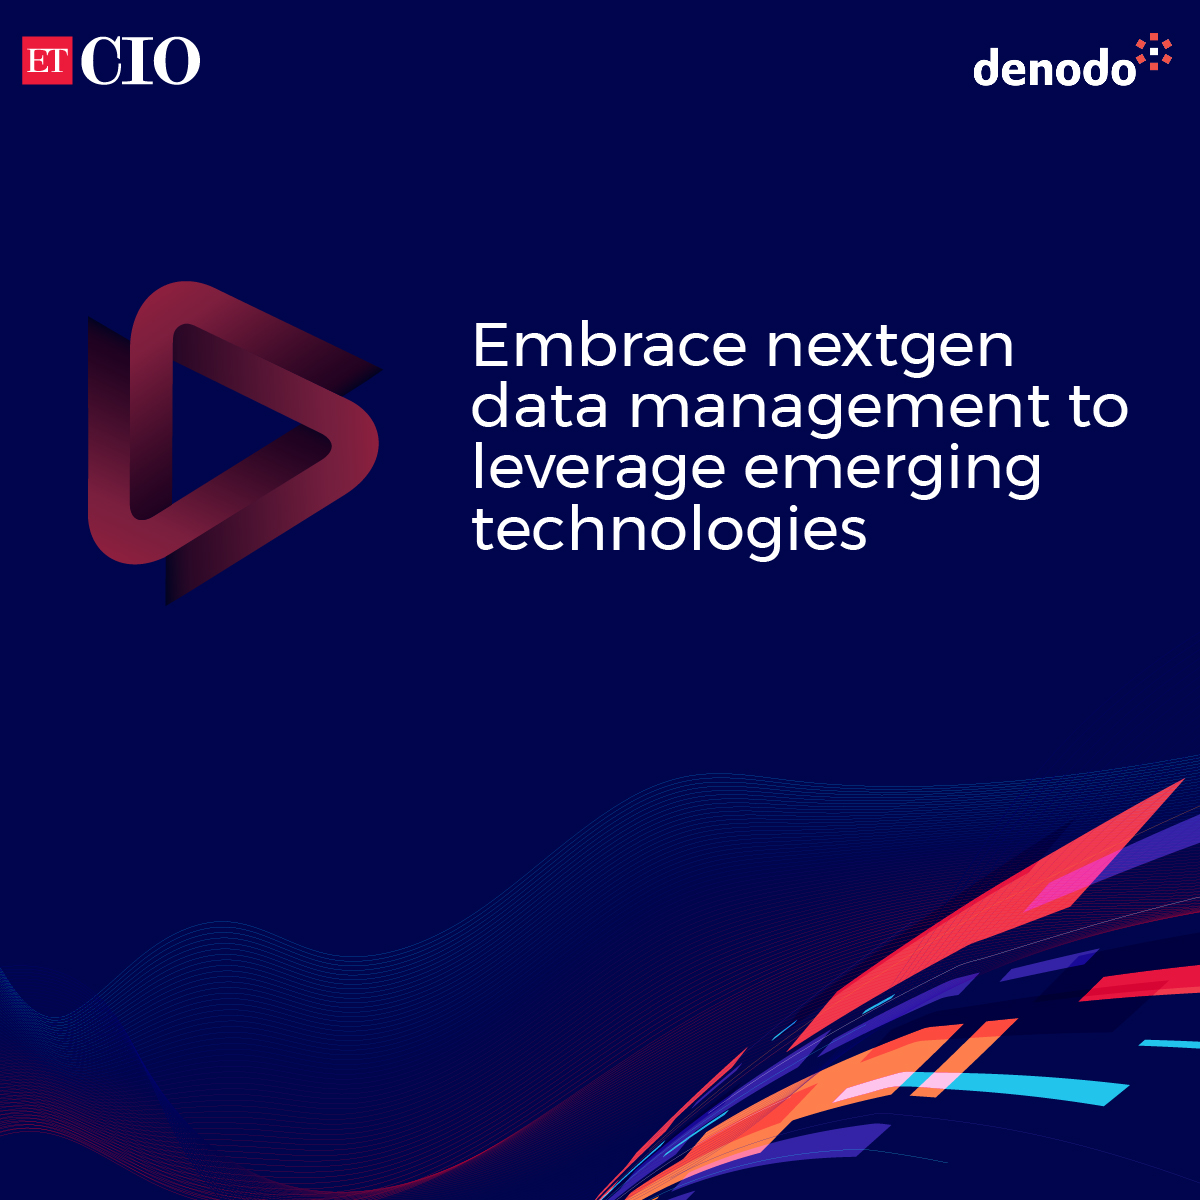 ETCIO spoke with Ravi Shankar, Senior Vice President and Chief Marketing Officer, Denodo on how a robust data management system is the only way for organizations to confront complex real-world challenges & take digital transformation to the next level. cio.economictimes.indiatimes.com/videos/embrace…